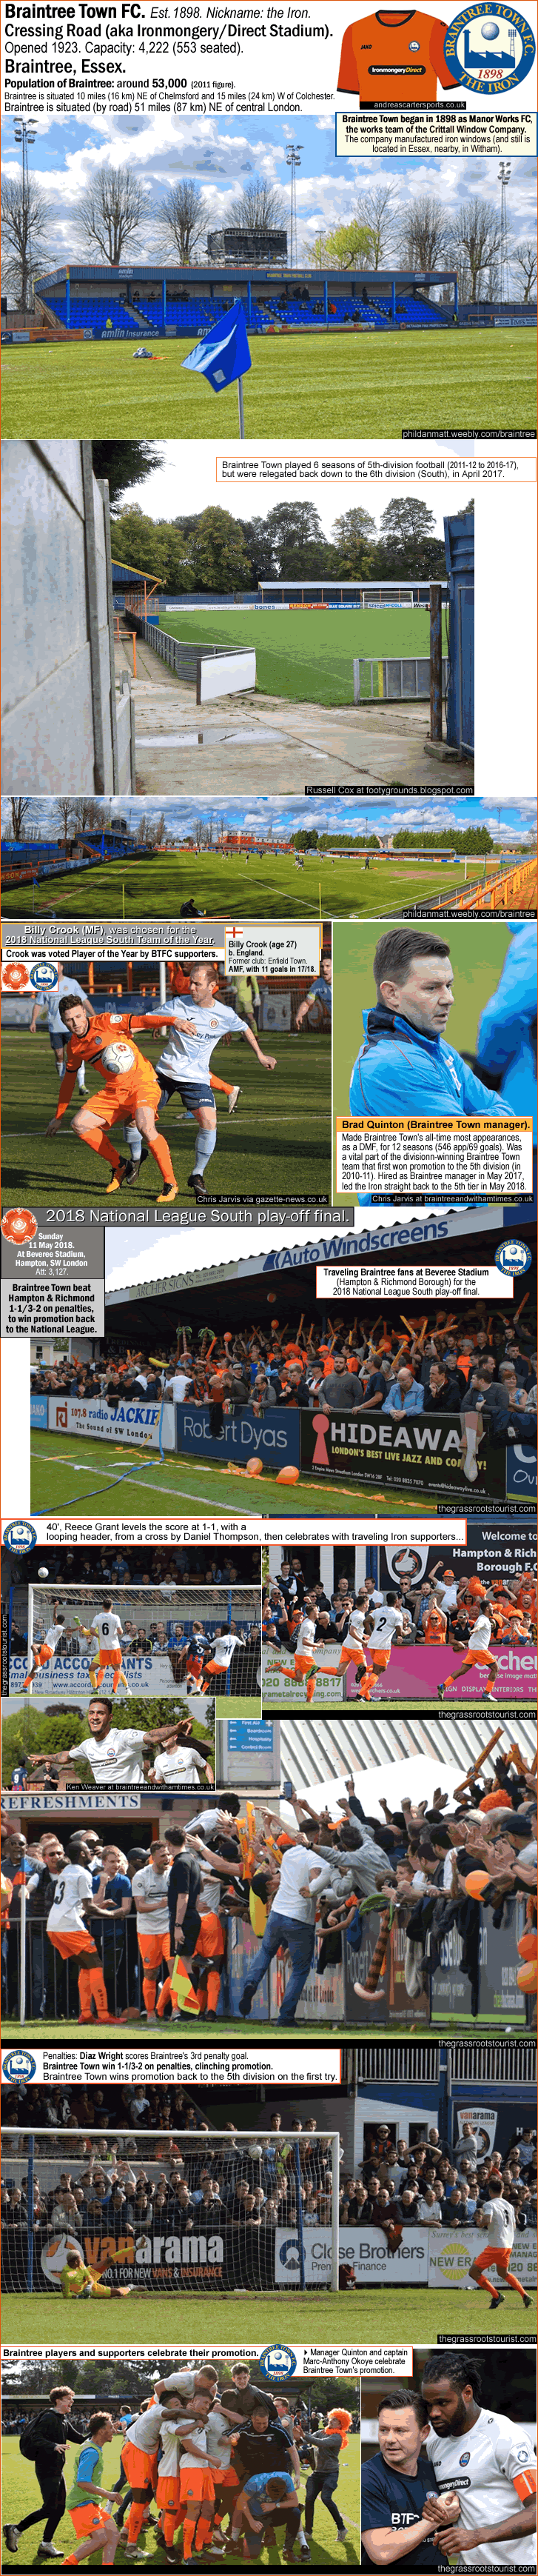 braintree-town_promoted-2018_cressing-road_bradley-quinton_billy-crook_reece-grant_marc-anthony-okoye_b_.gif